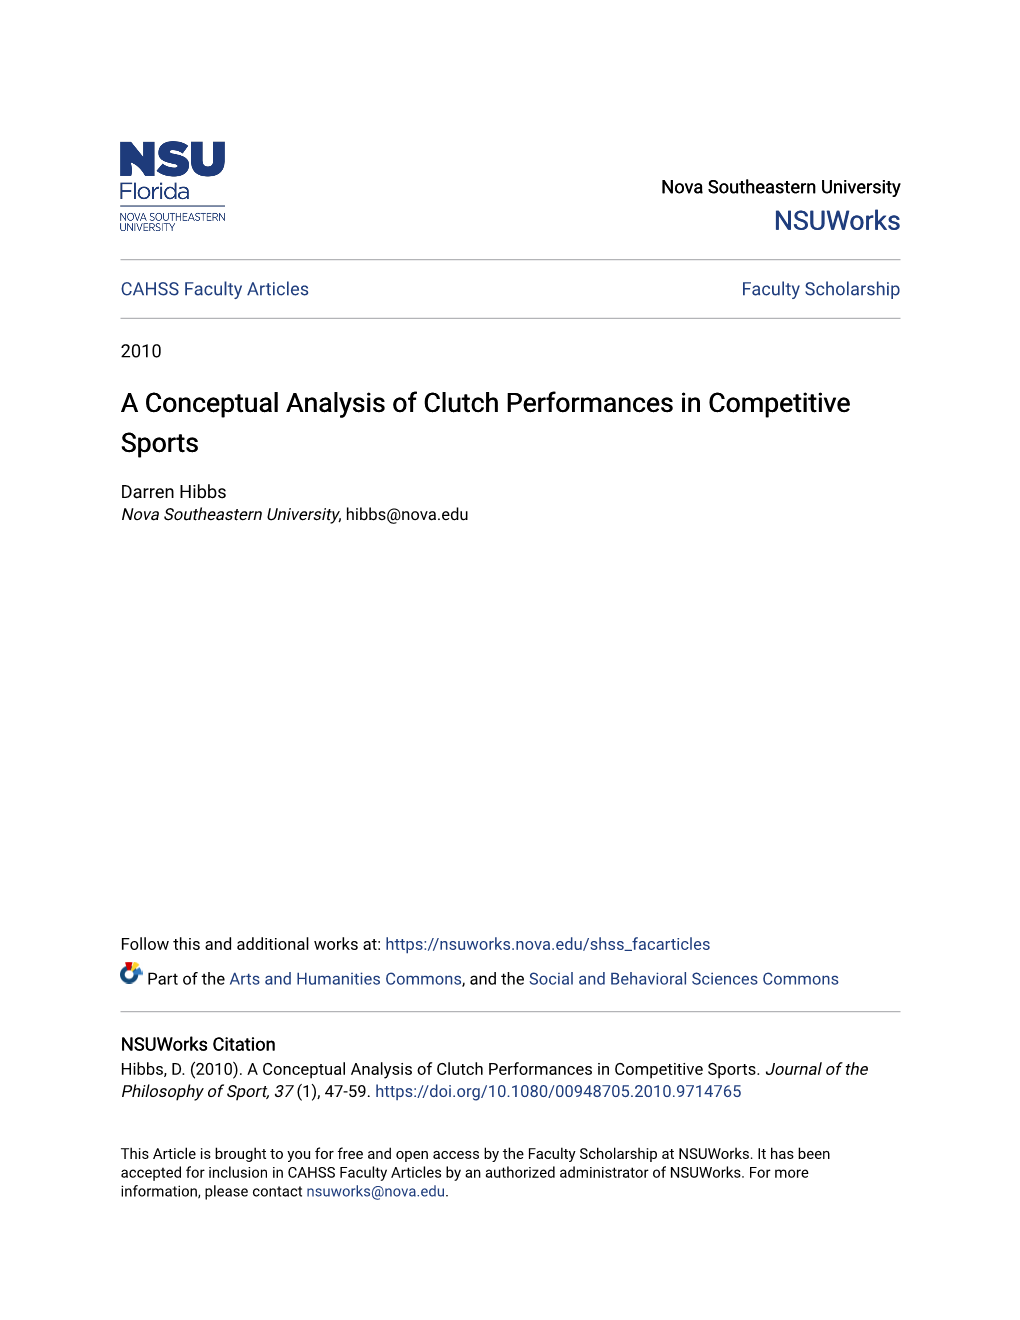 A Conceptual Analysis of Clutch Performances in Competitive Sports